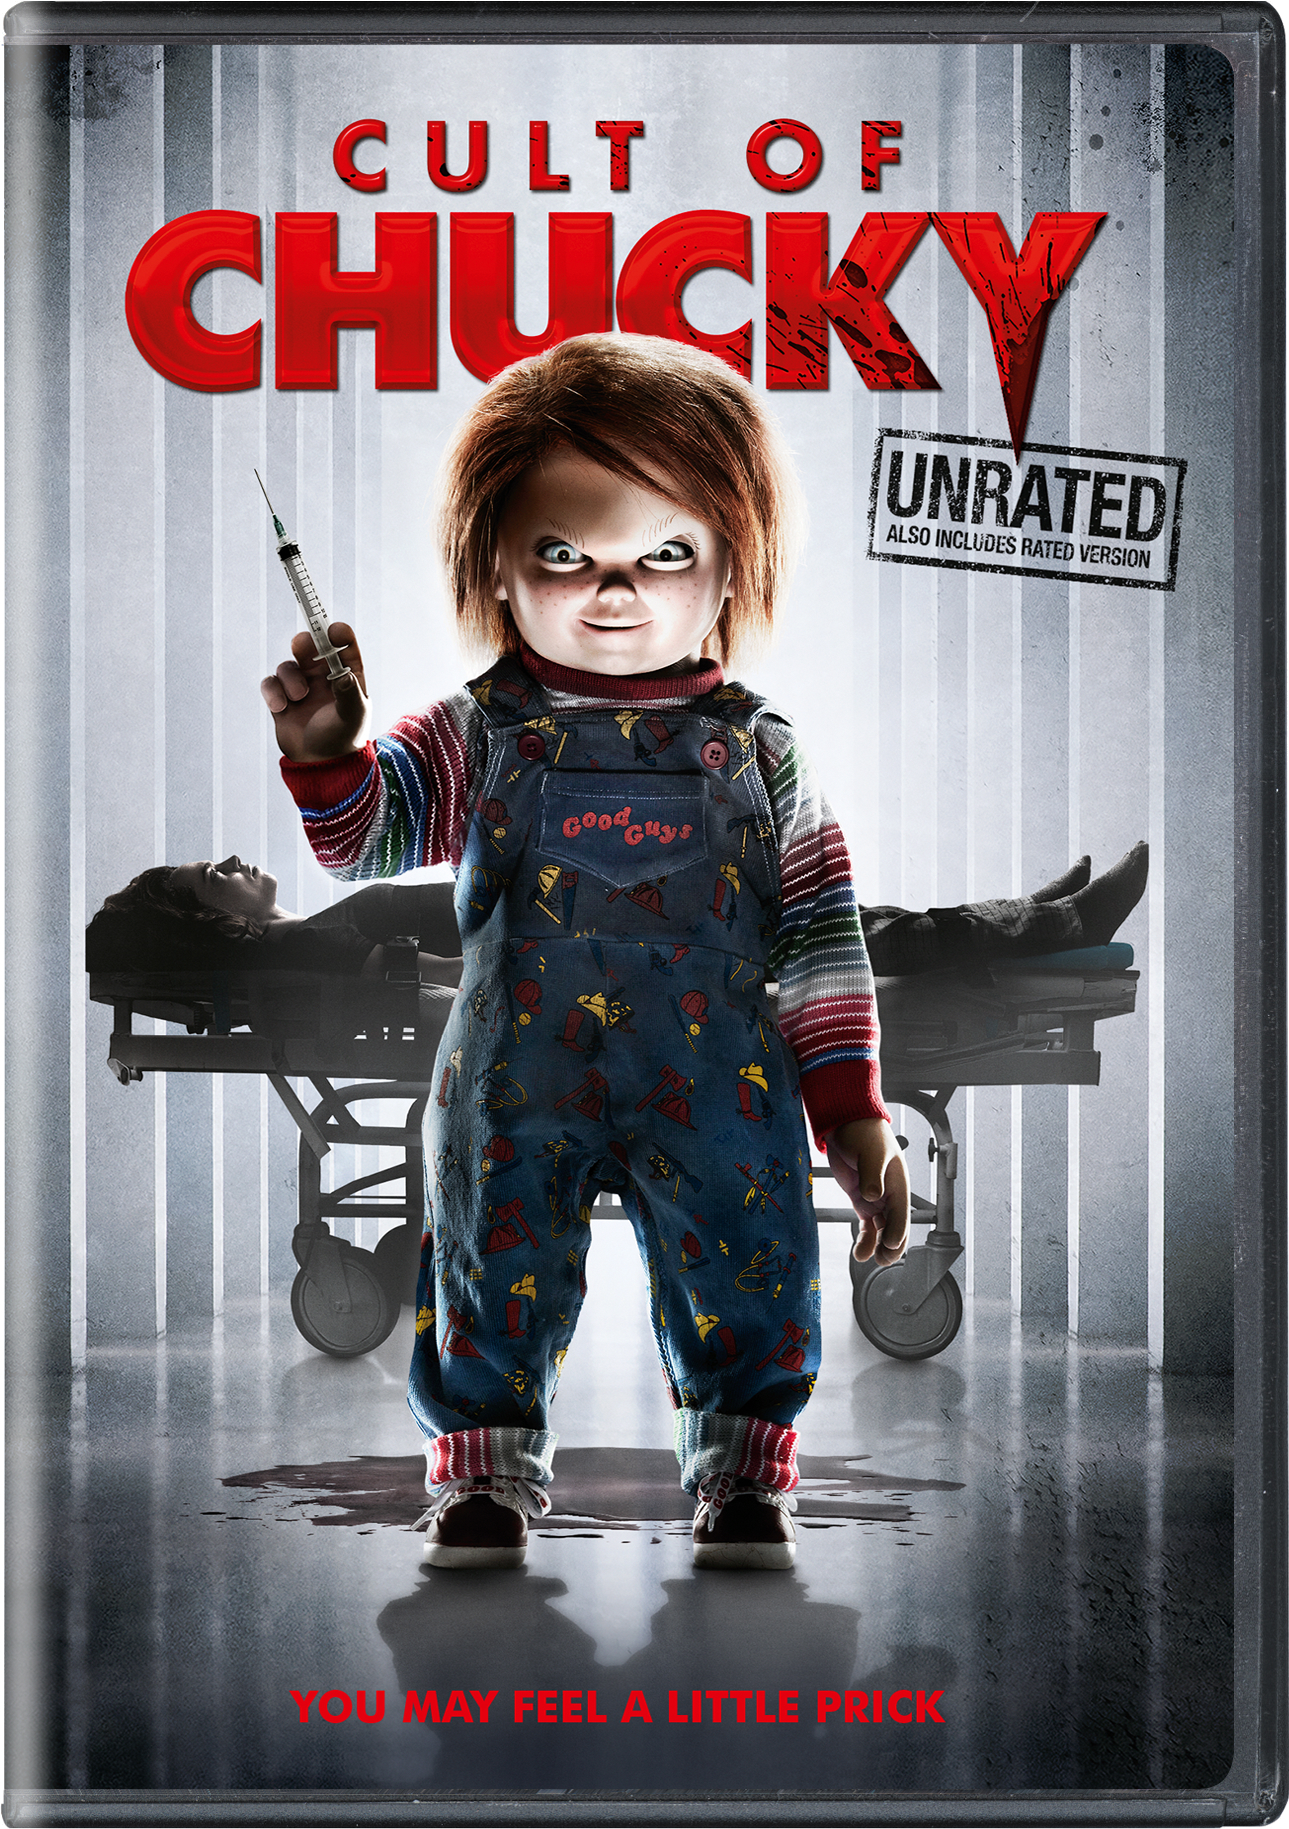 Cult Of Chucky (DVD Unrated) - DVD [ 2017 ]  - Horror Movies On DVD - Movies On GRUV